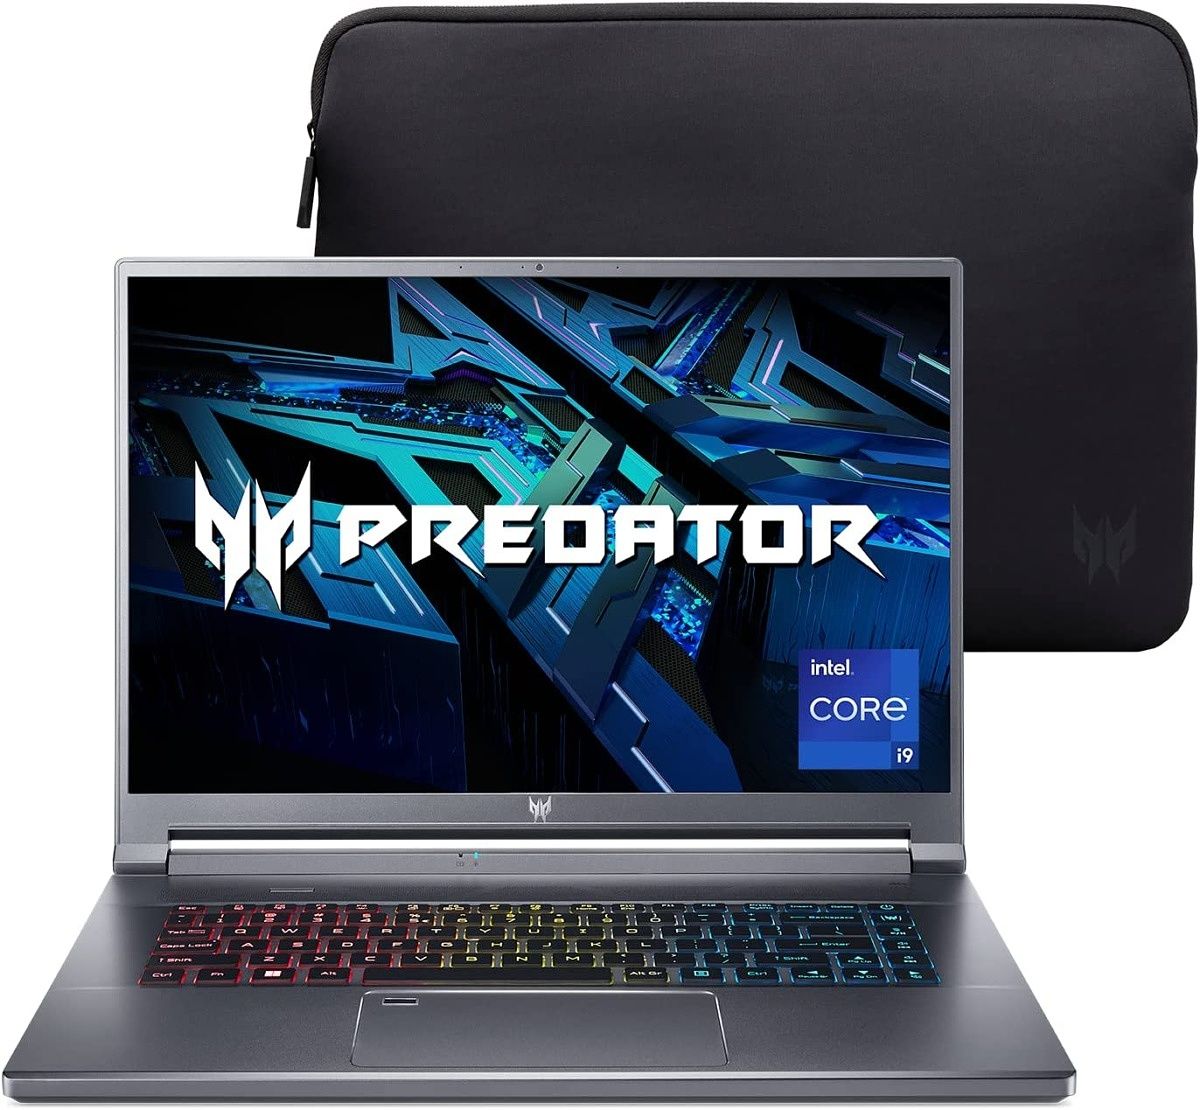 The Acer Predator Triton 500 SE is a seriously powerful laptop with an Intel Core i9 CPU and RTX 3080Ti graphics.